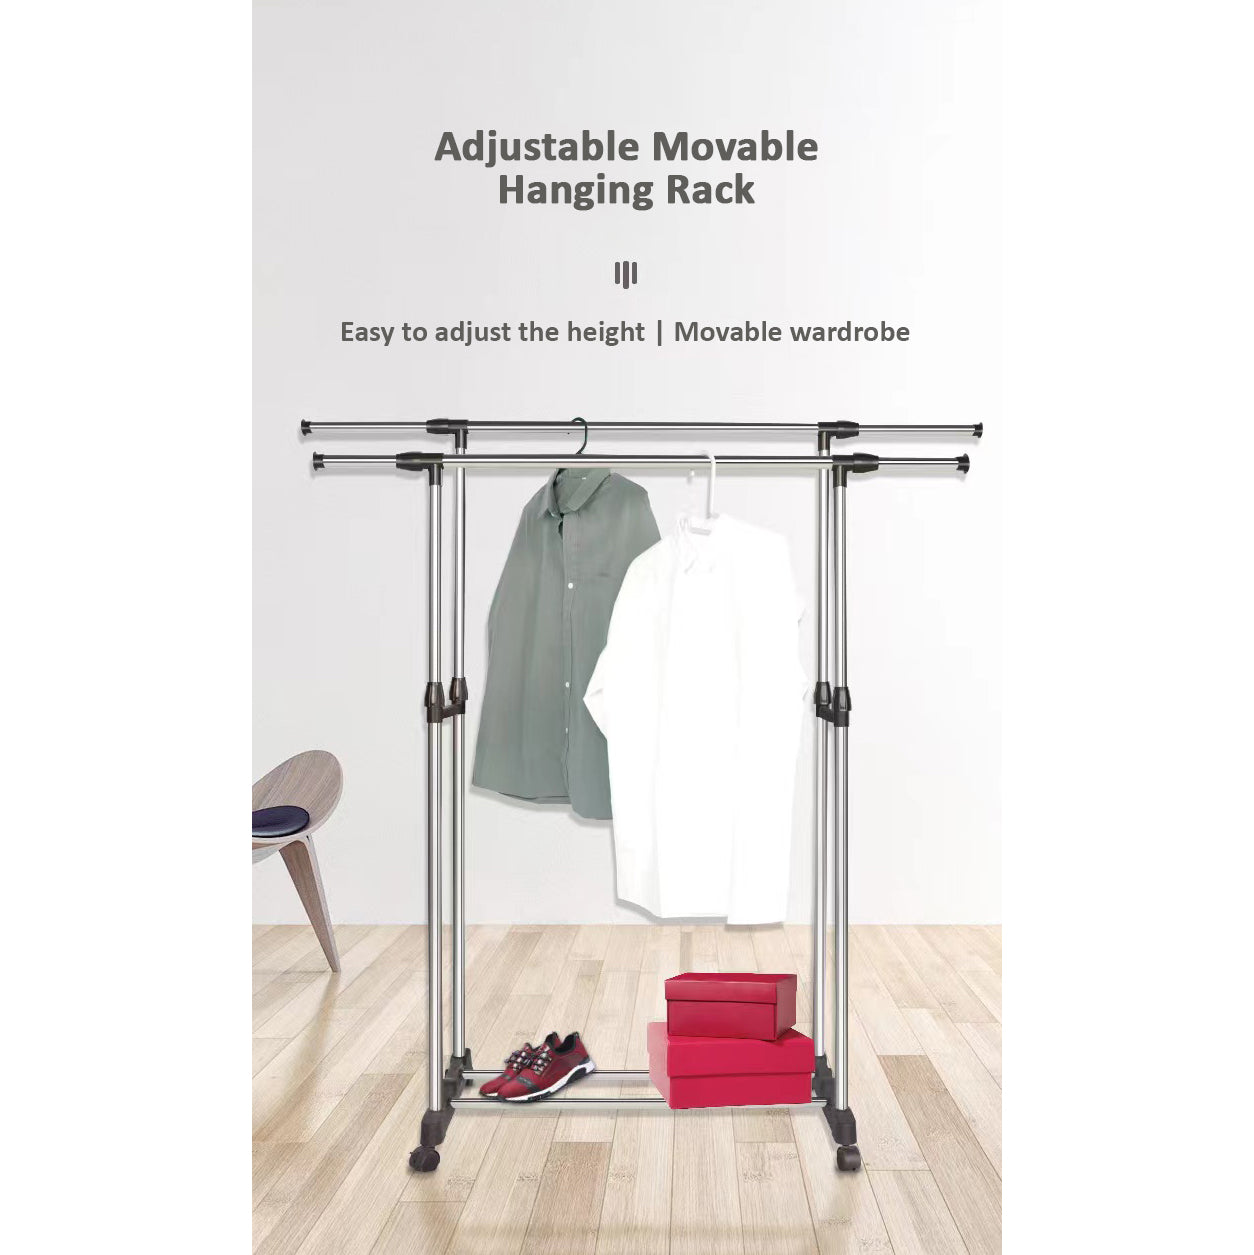 Adjustable Double Pole Clothesdrying Drying Rack Stand With Wheels Drying Racks & Hangers ONE2WORLD 